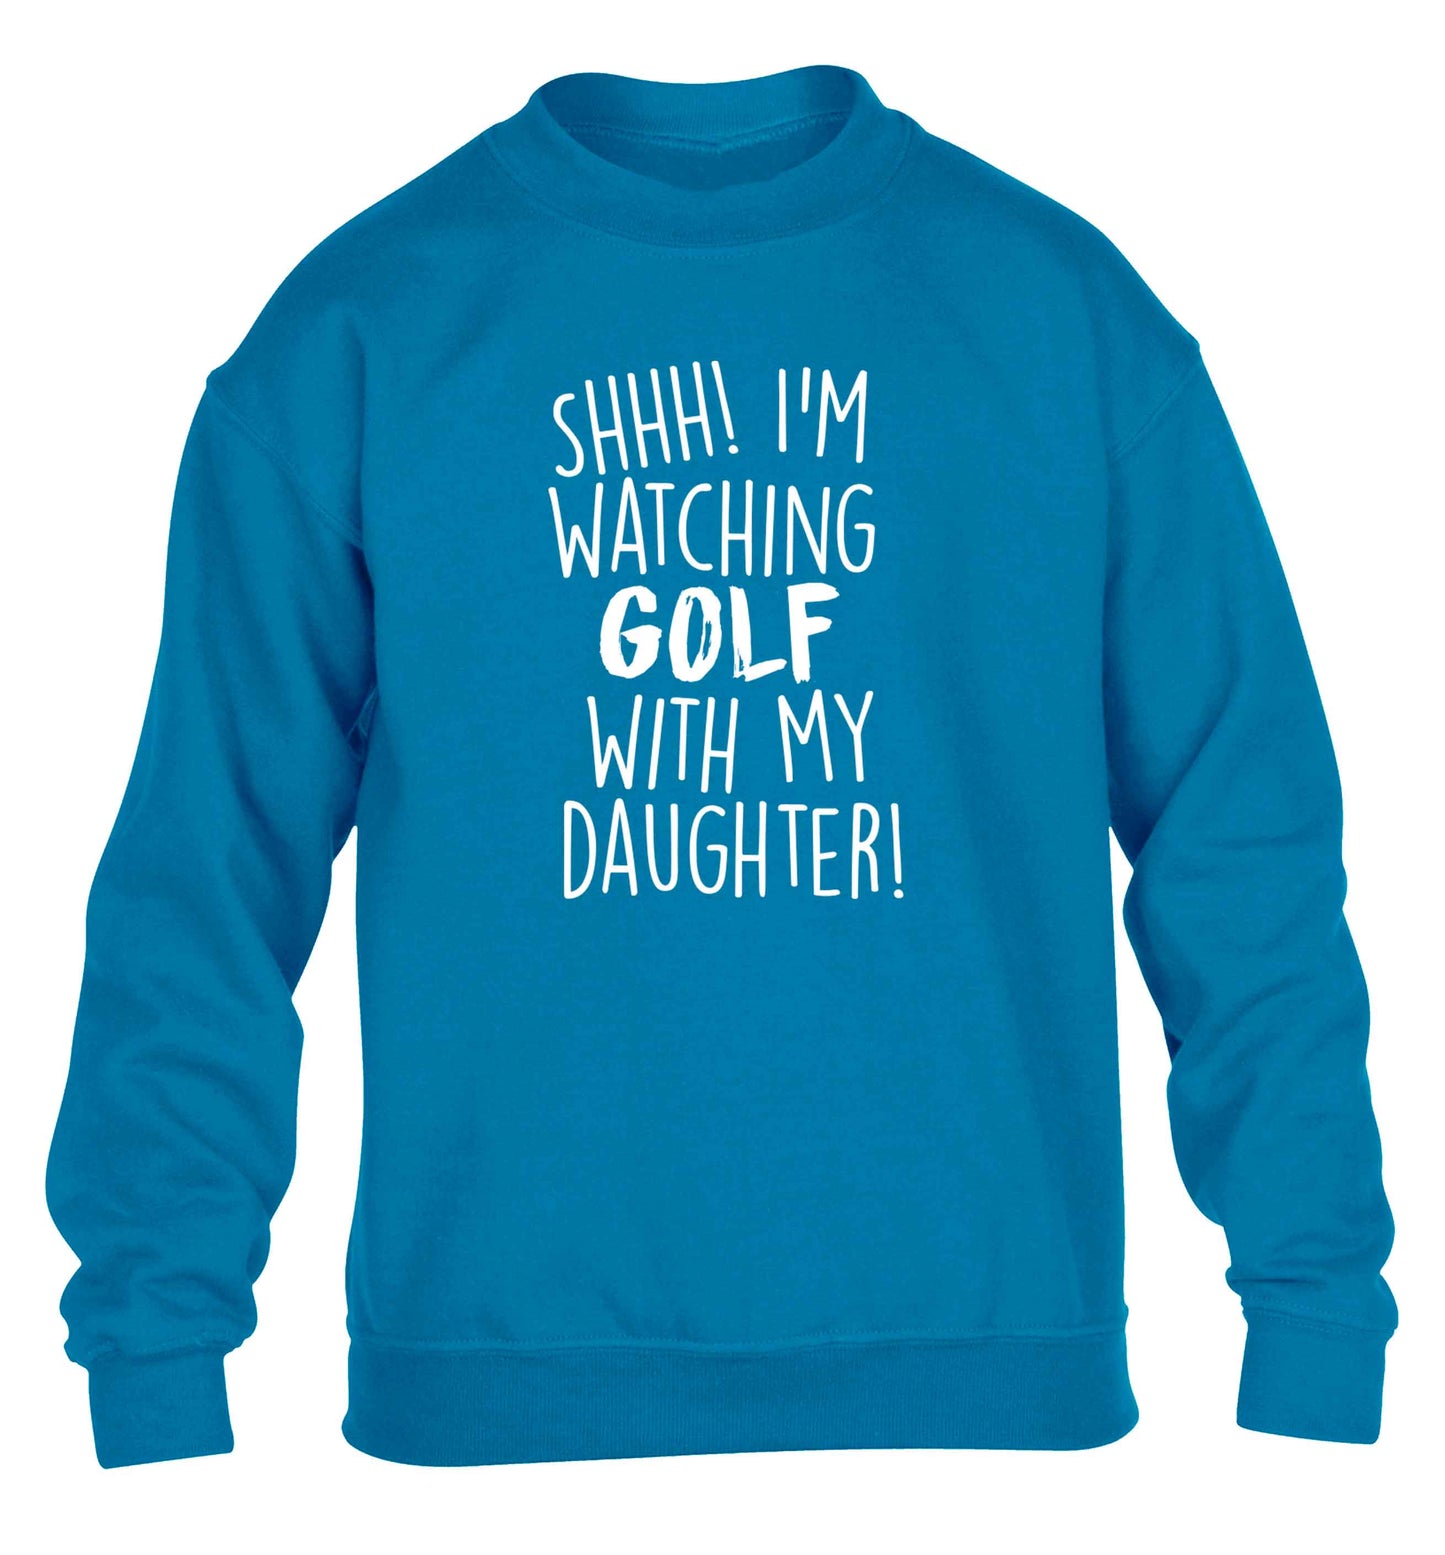 Shh I'm watching golf with my daughter children's blue sweater 12-13 Years